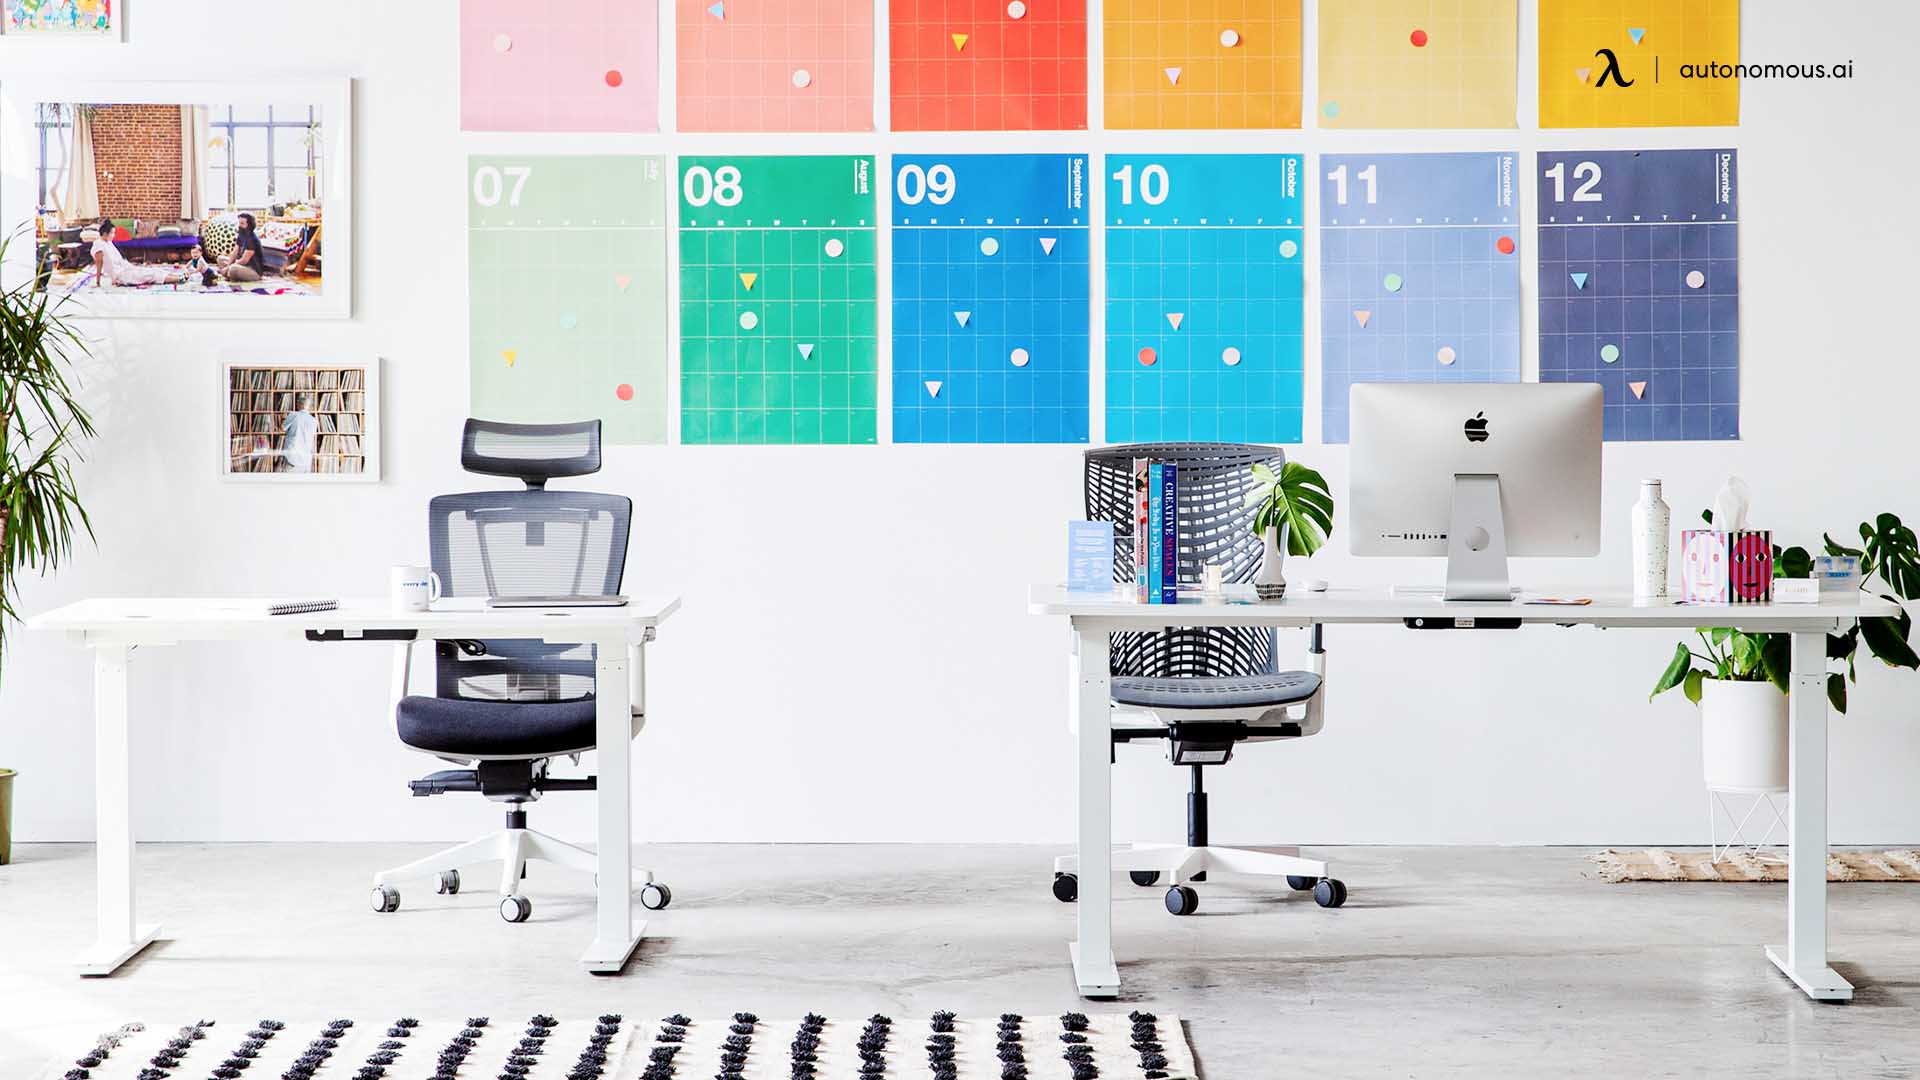 Workspaces tailored to each individual